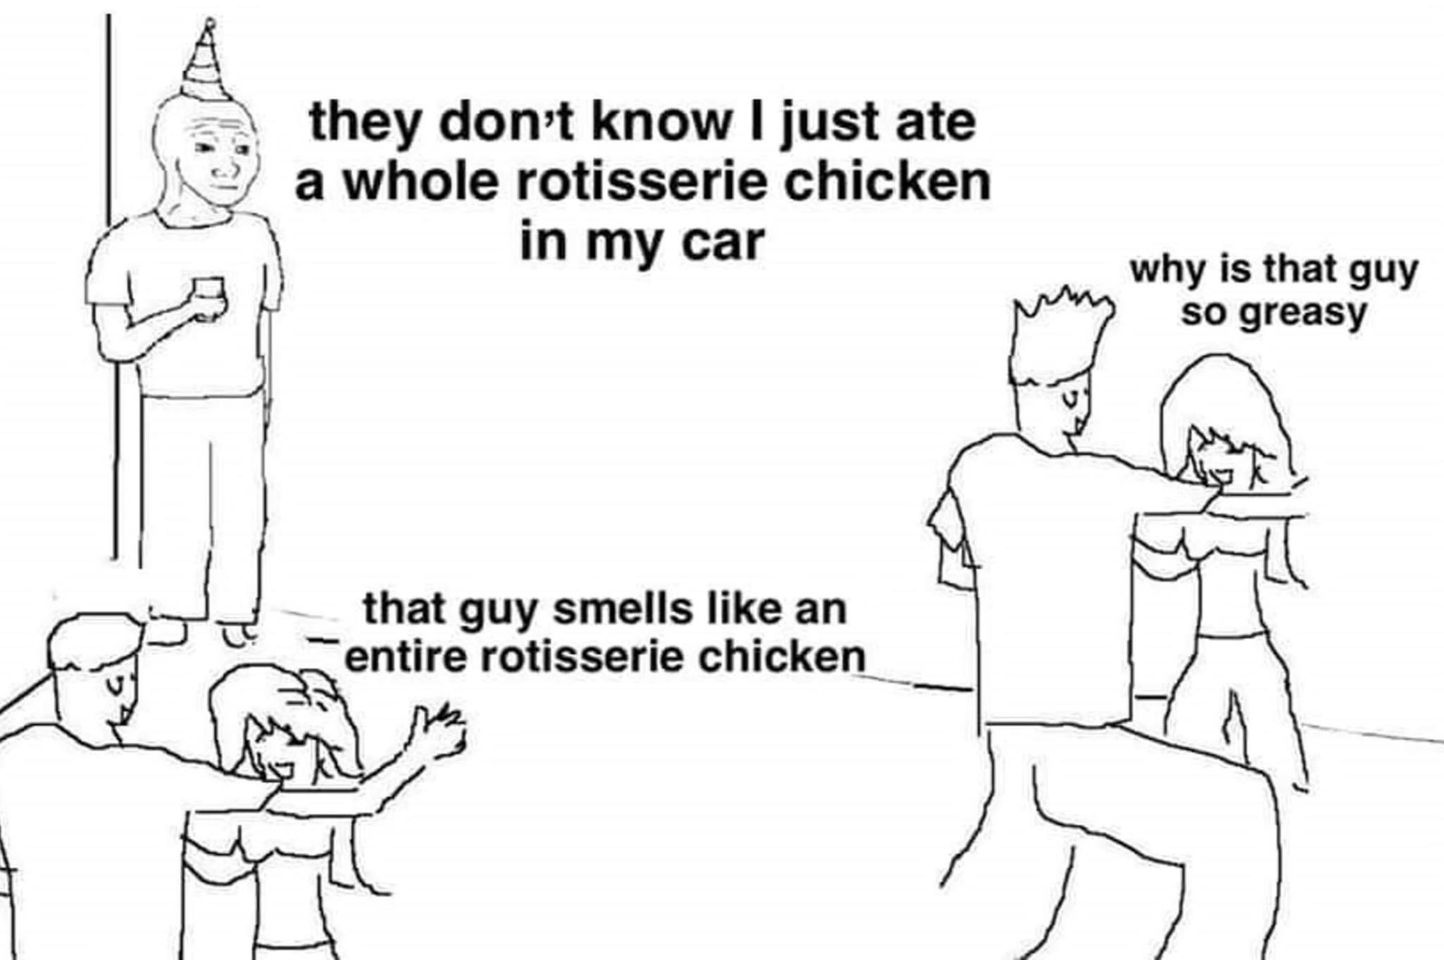 funny memes - whole rotisserie chicken meme - they don't know I just ate a whole rotisserie chicken in my car that guy smells an entire rotisserie chicken why is that guy so greasy